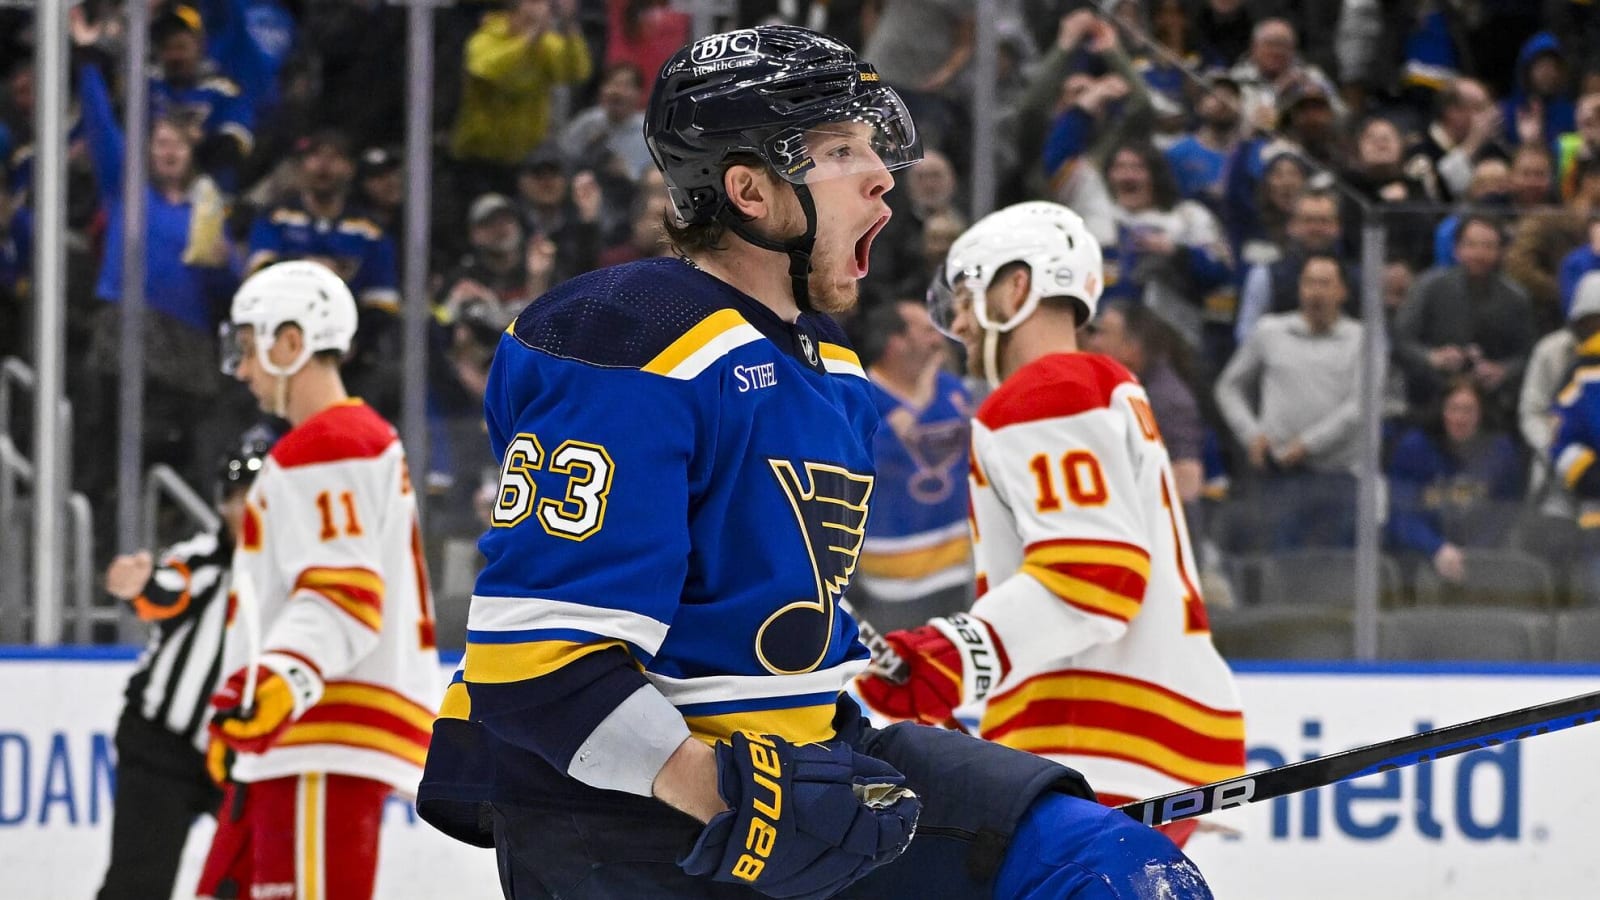 A goal review (and non-goal non-review) contributed to Thursday’s Flames loss to the St. Louis Blues